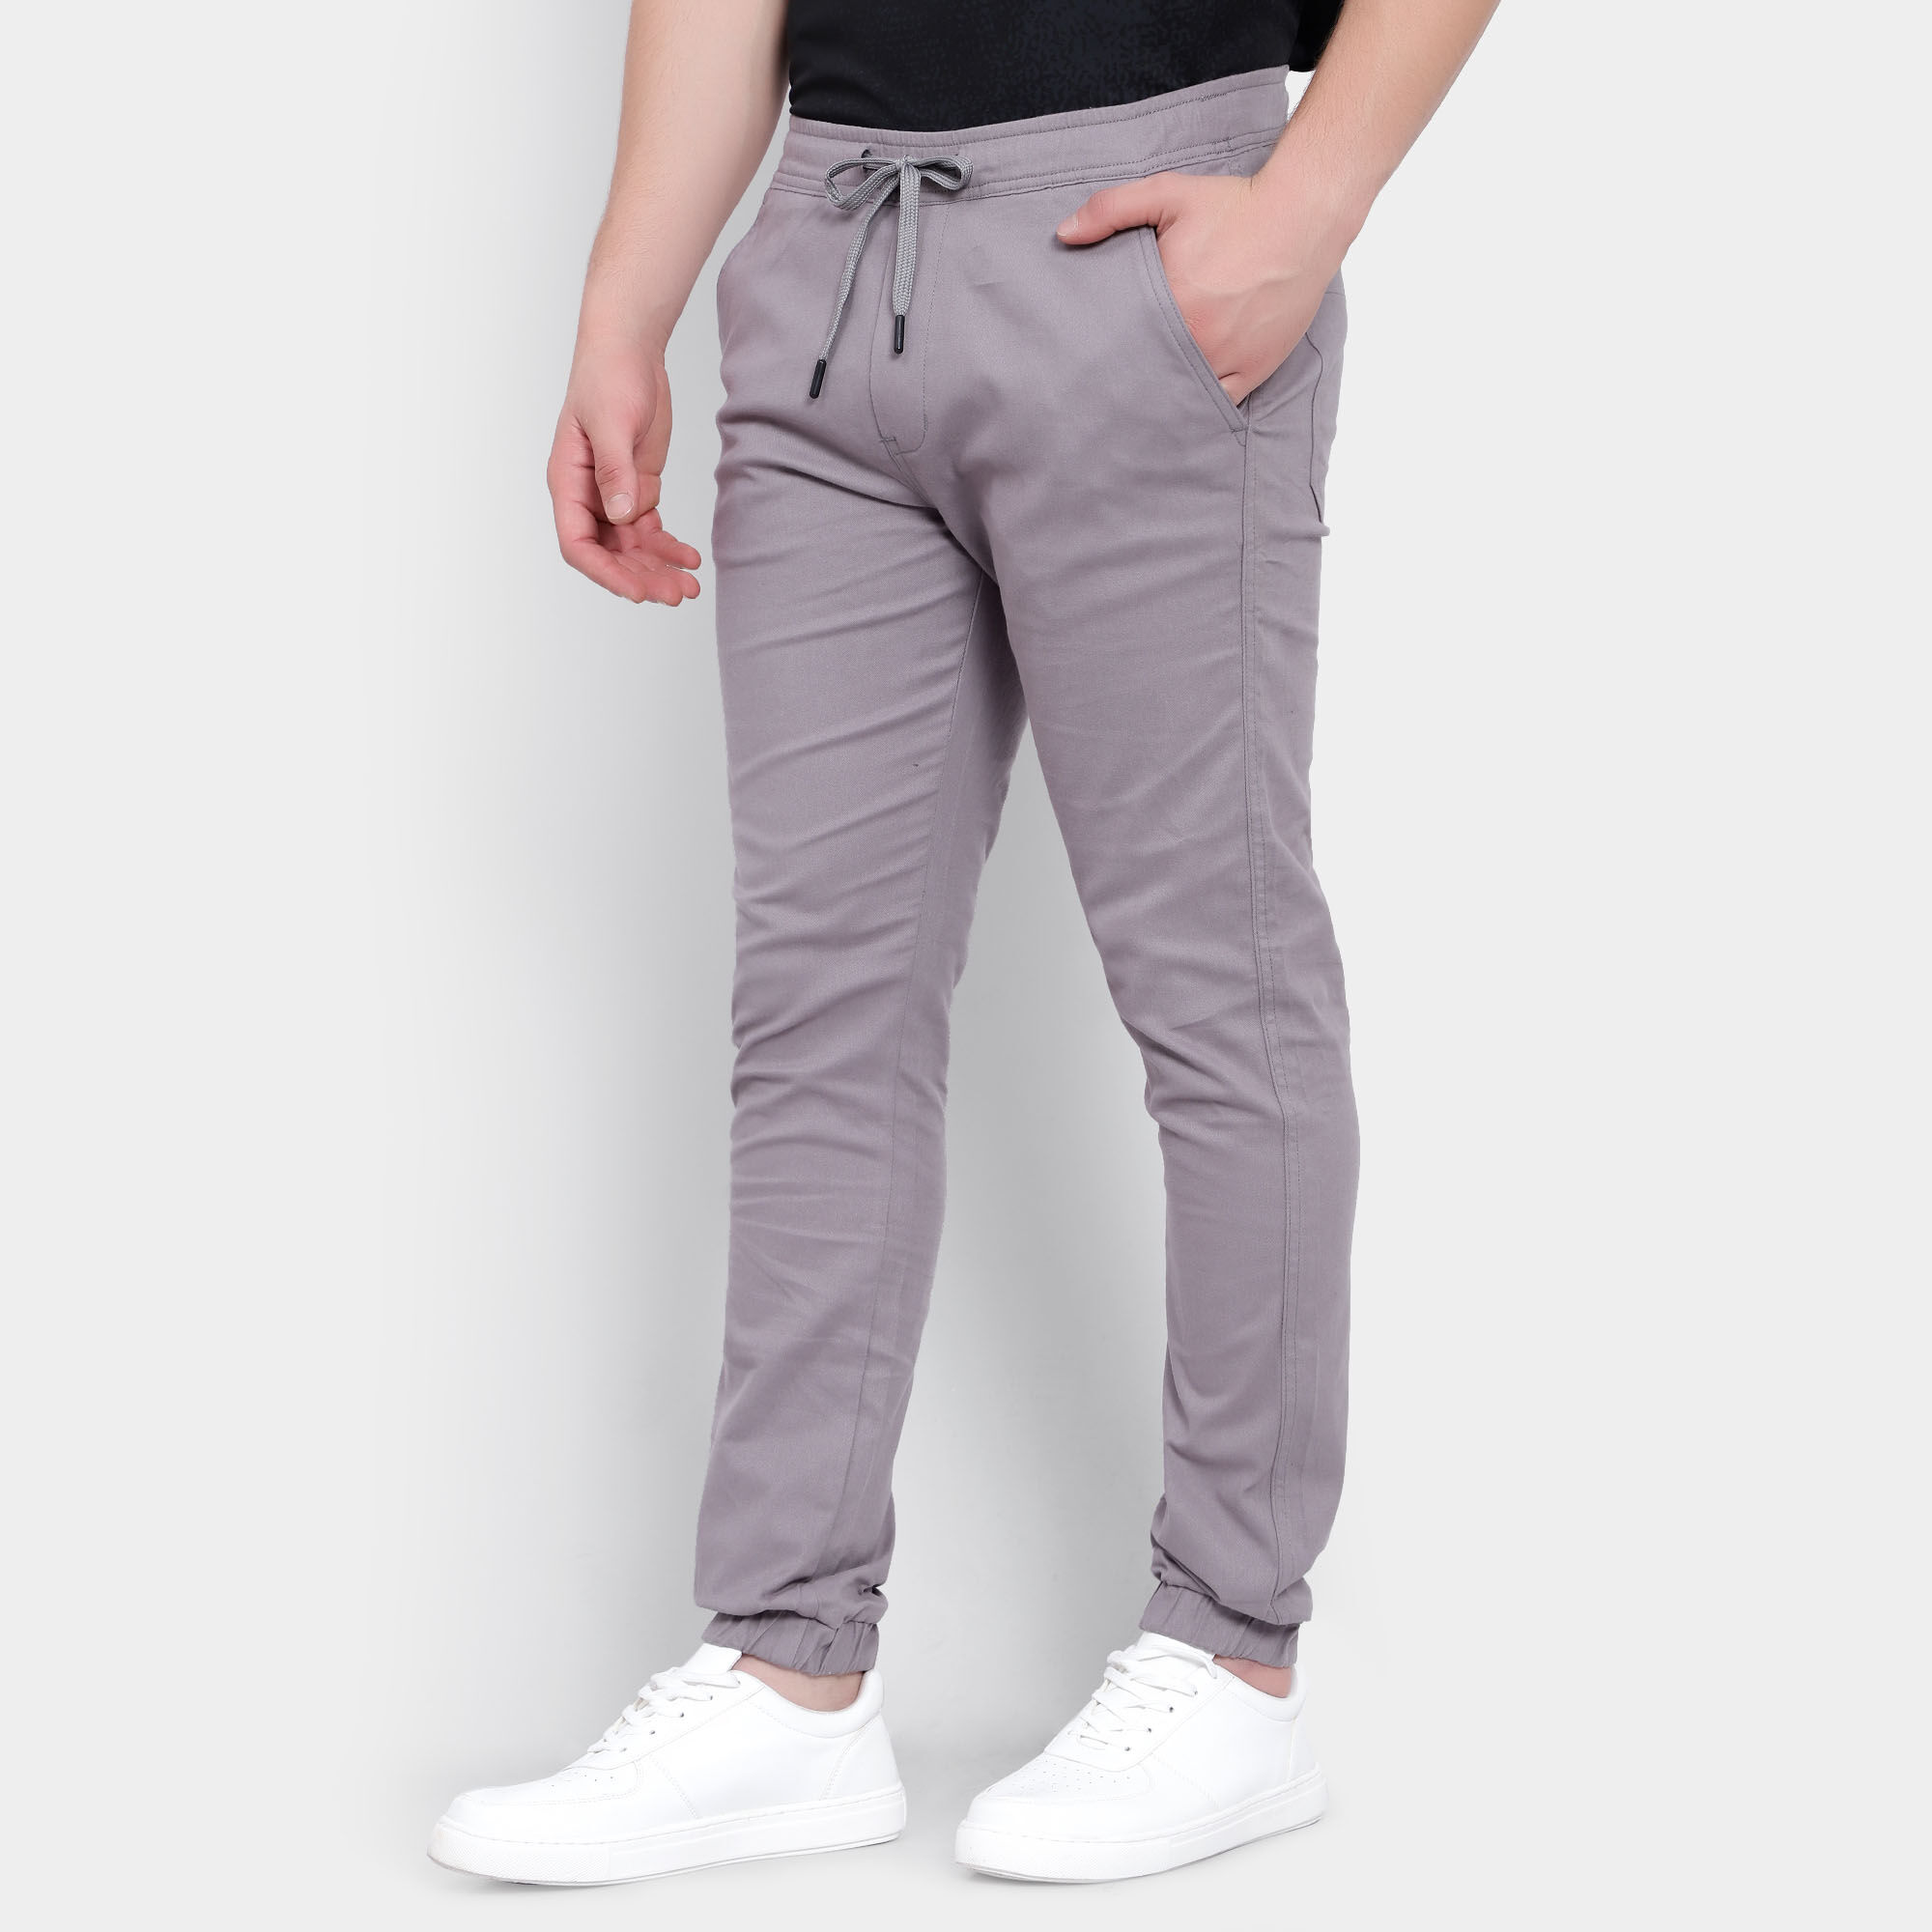 Flat Slim Fit White Polyester Formal Trouser, Machine wash, Size: 30-40  Inch at Rs 349 in Bhilwara